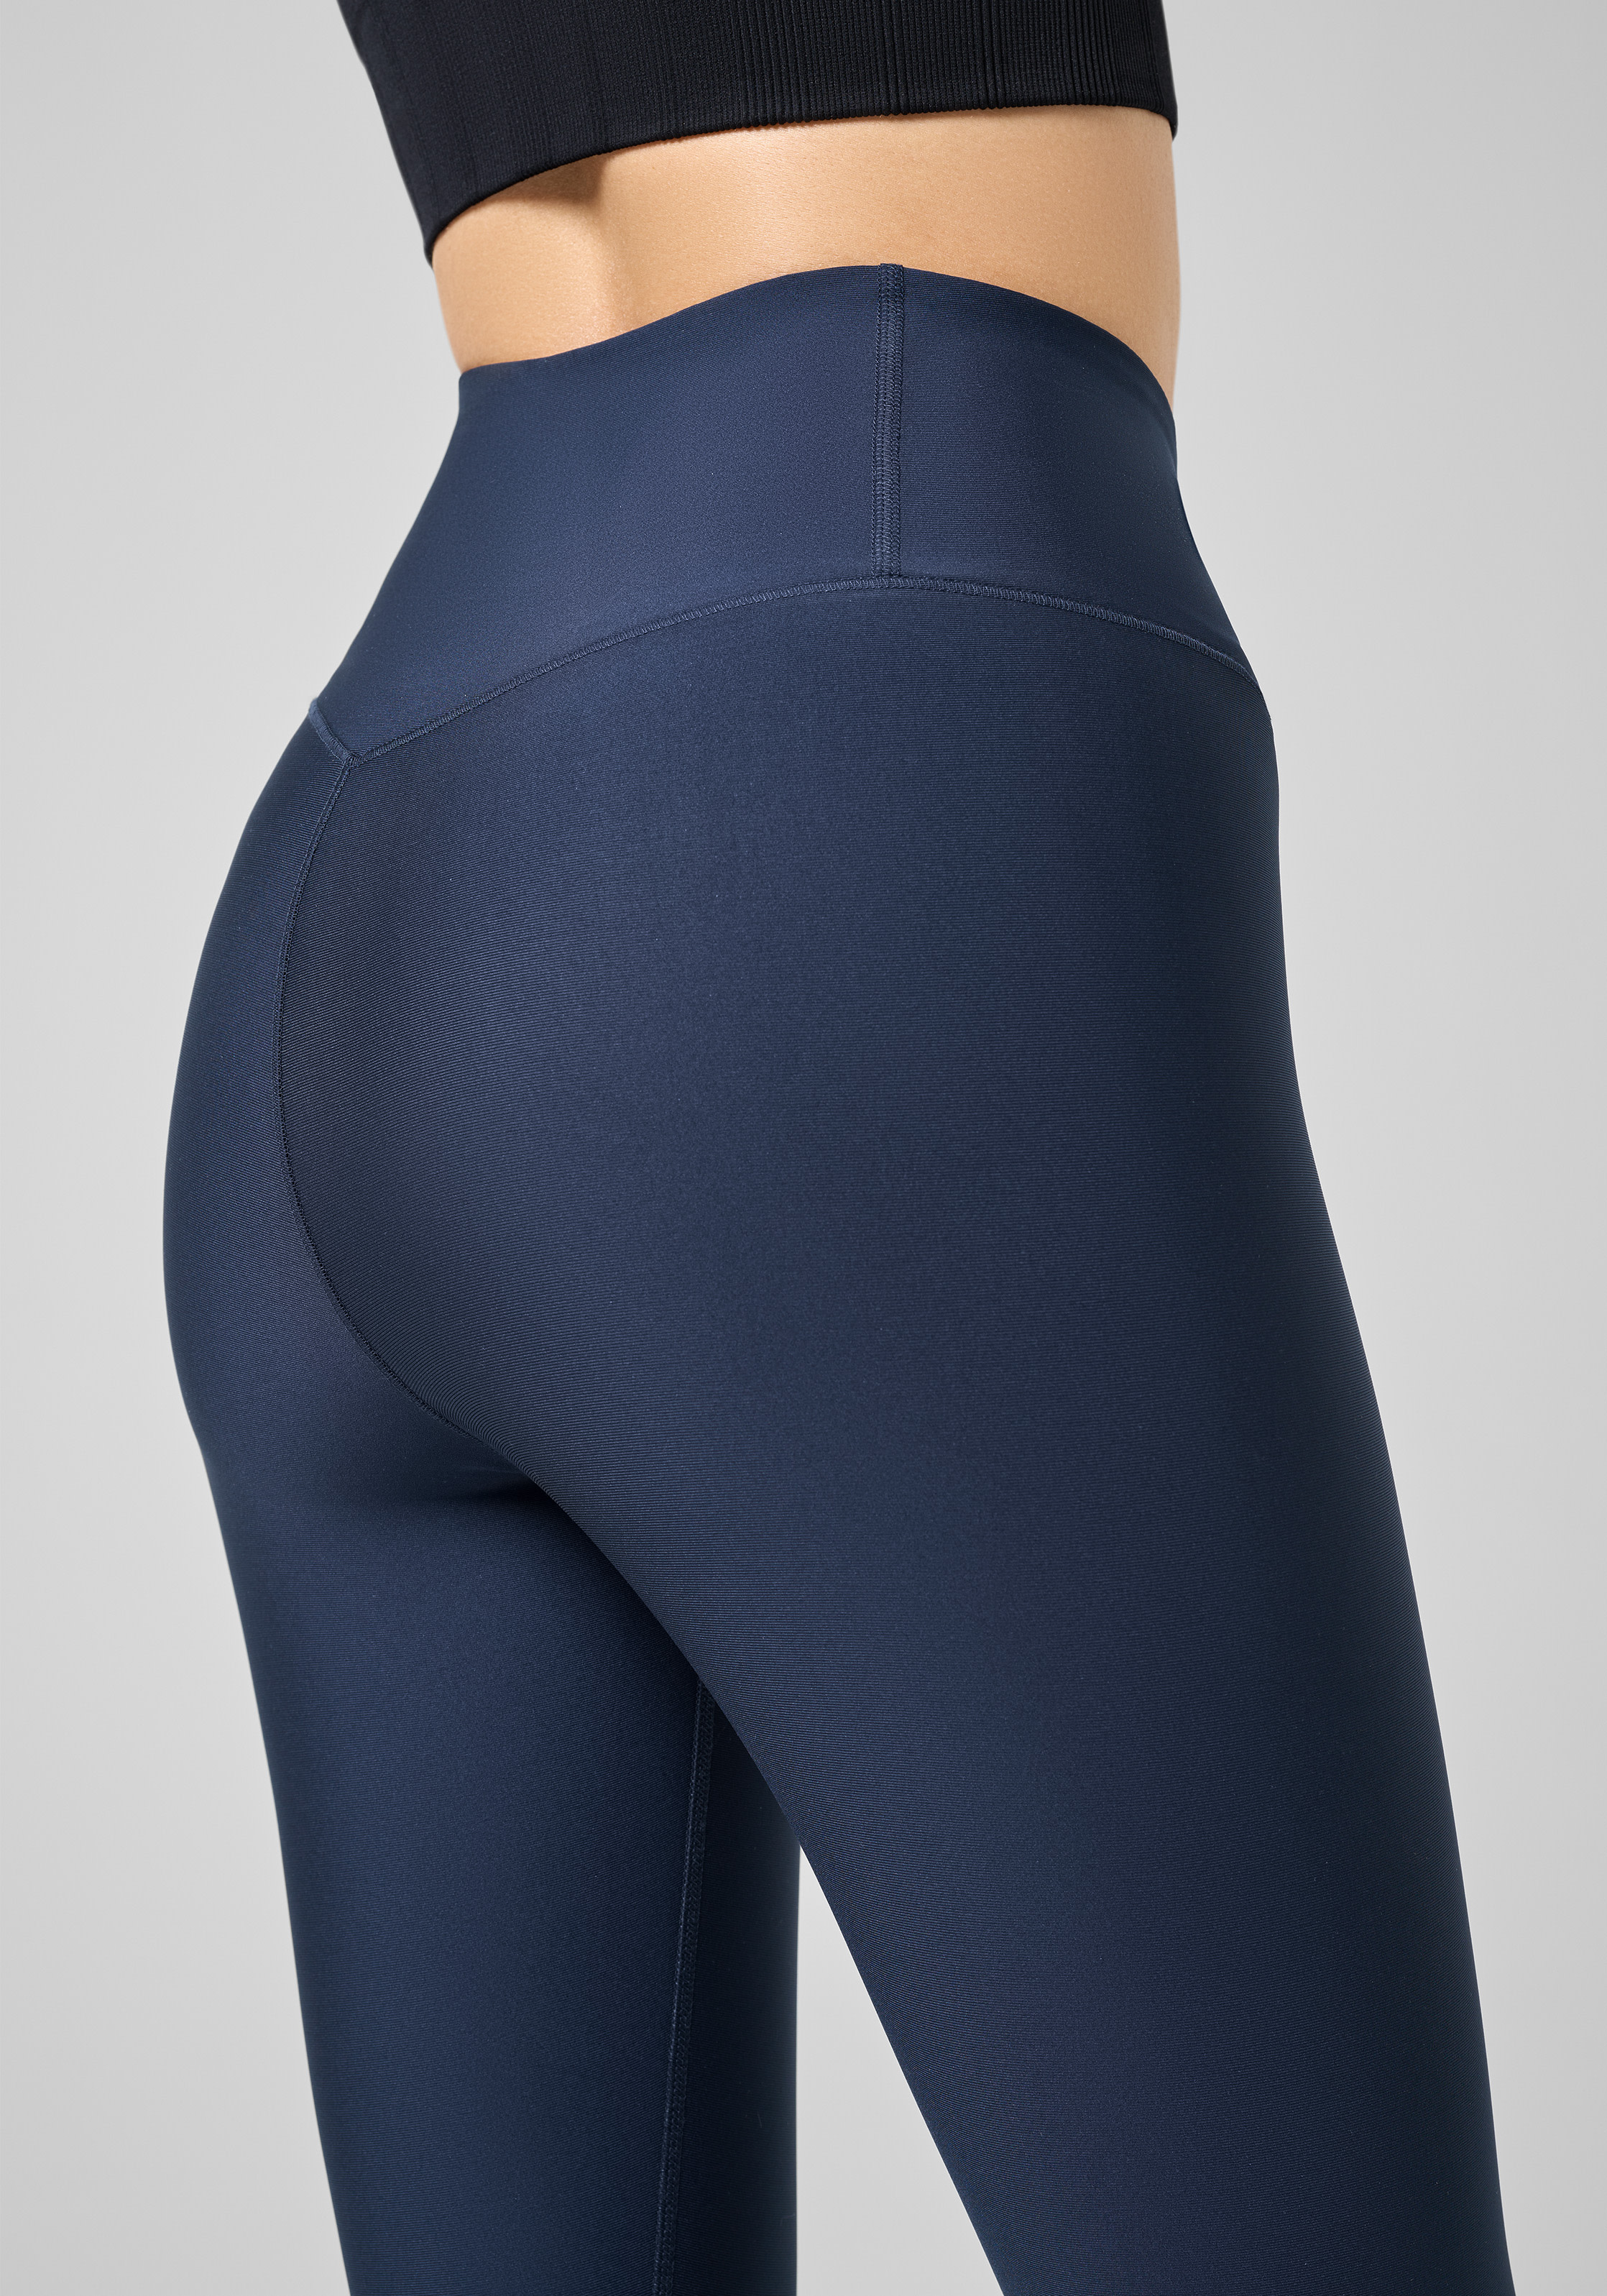 Women's Graphic Sport Tights Core Blue, Buy Women's Graphic Sport Tights  Core Blue here